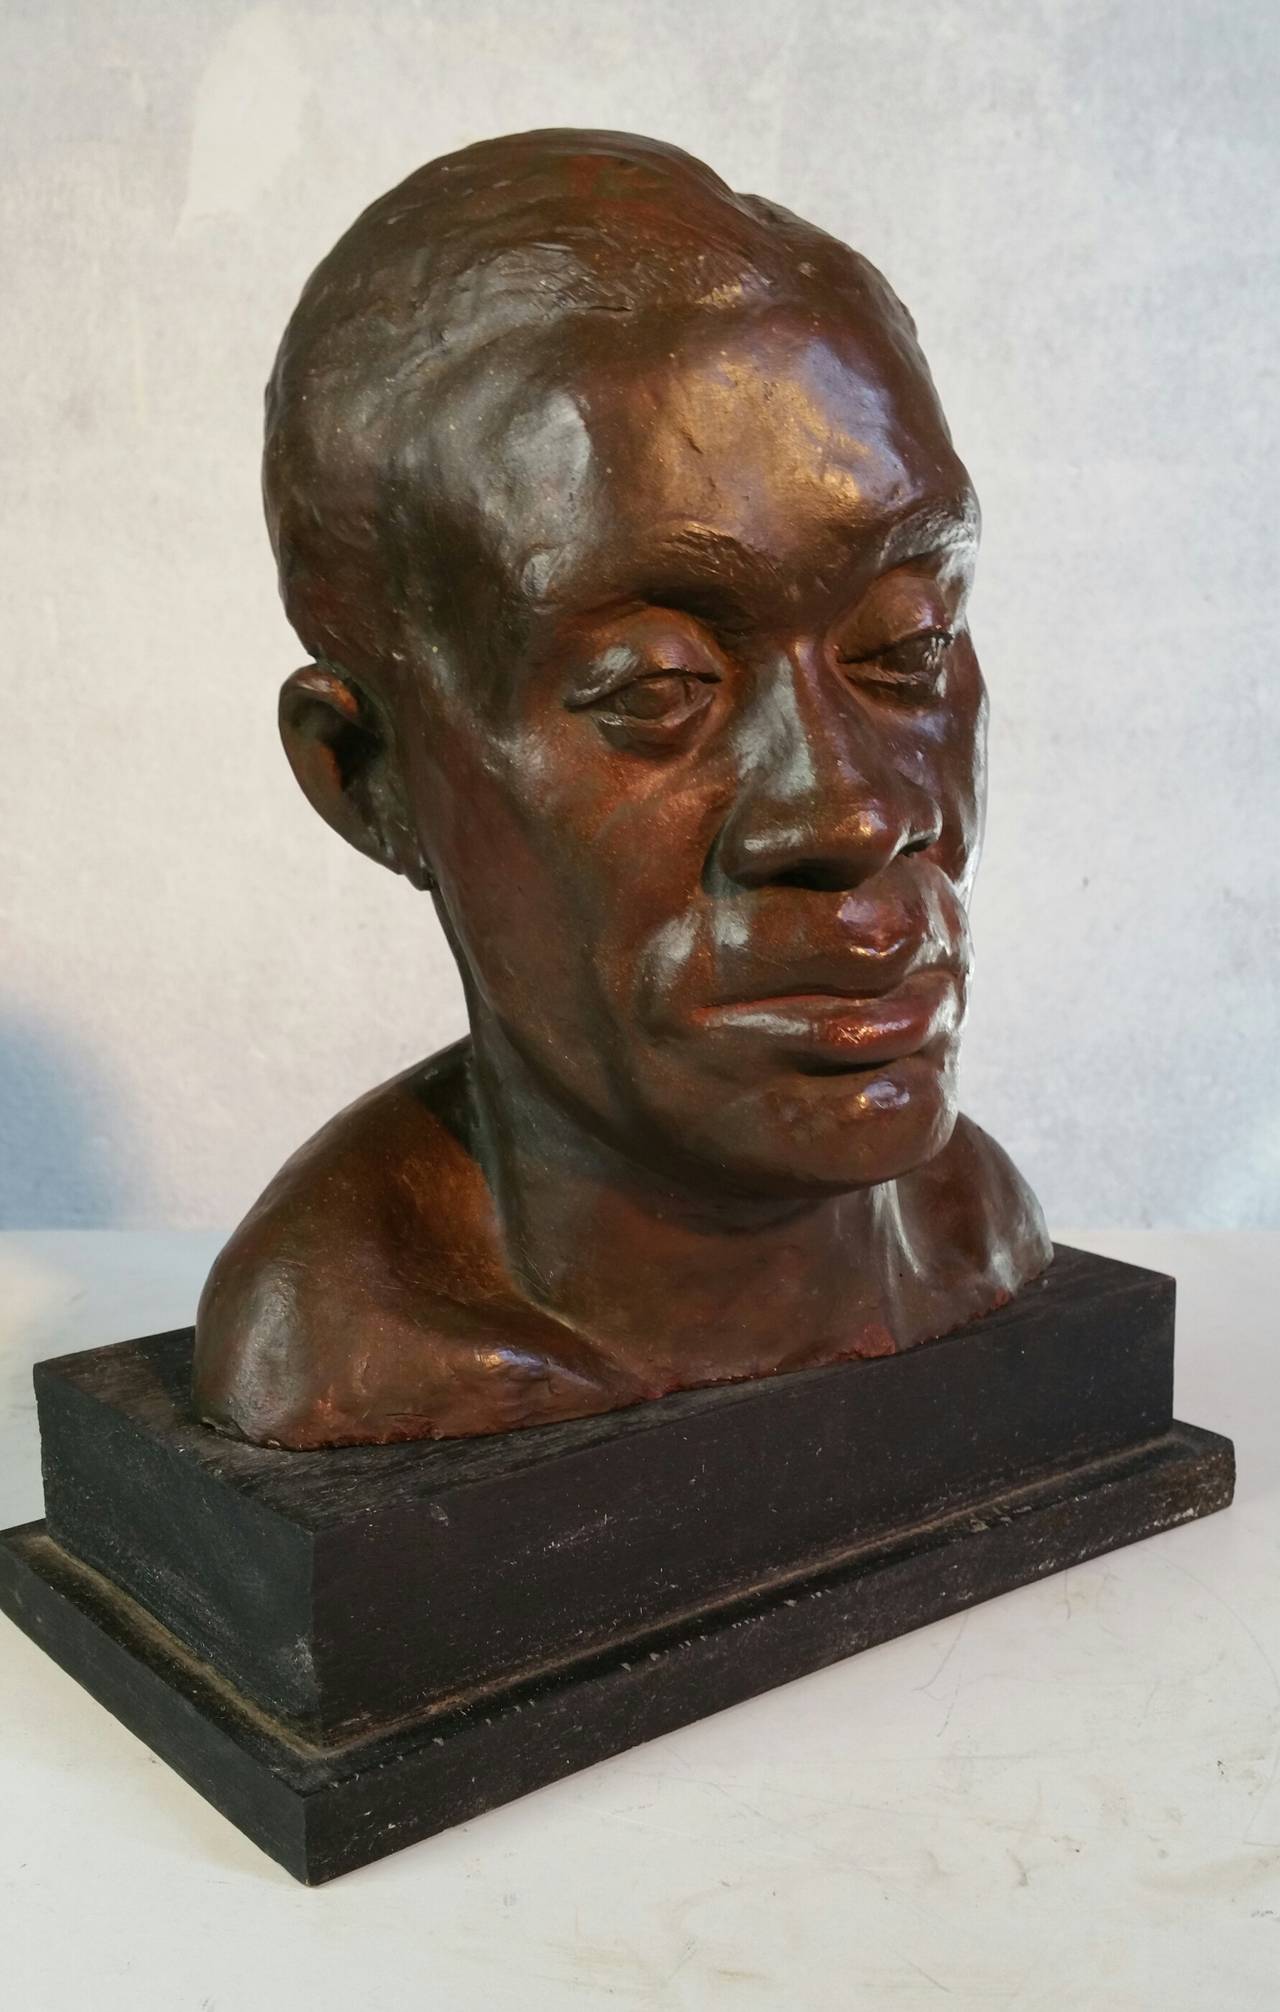 Beautifully exicuted plaster bust,, manner of Augusta Savage,depicting African American Man,,Acquired from estate collection originally purchased in New York City.. Artist truely captured the many emotions,trials and tribulations of the 1930s..Many